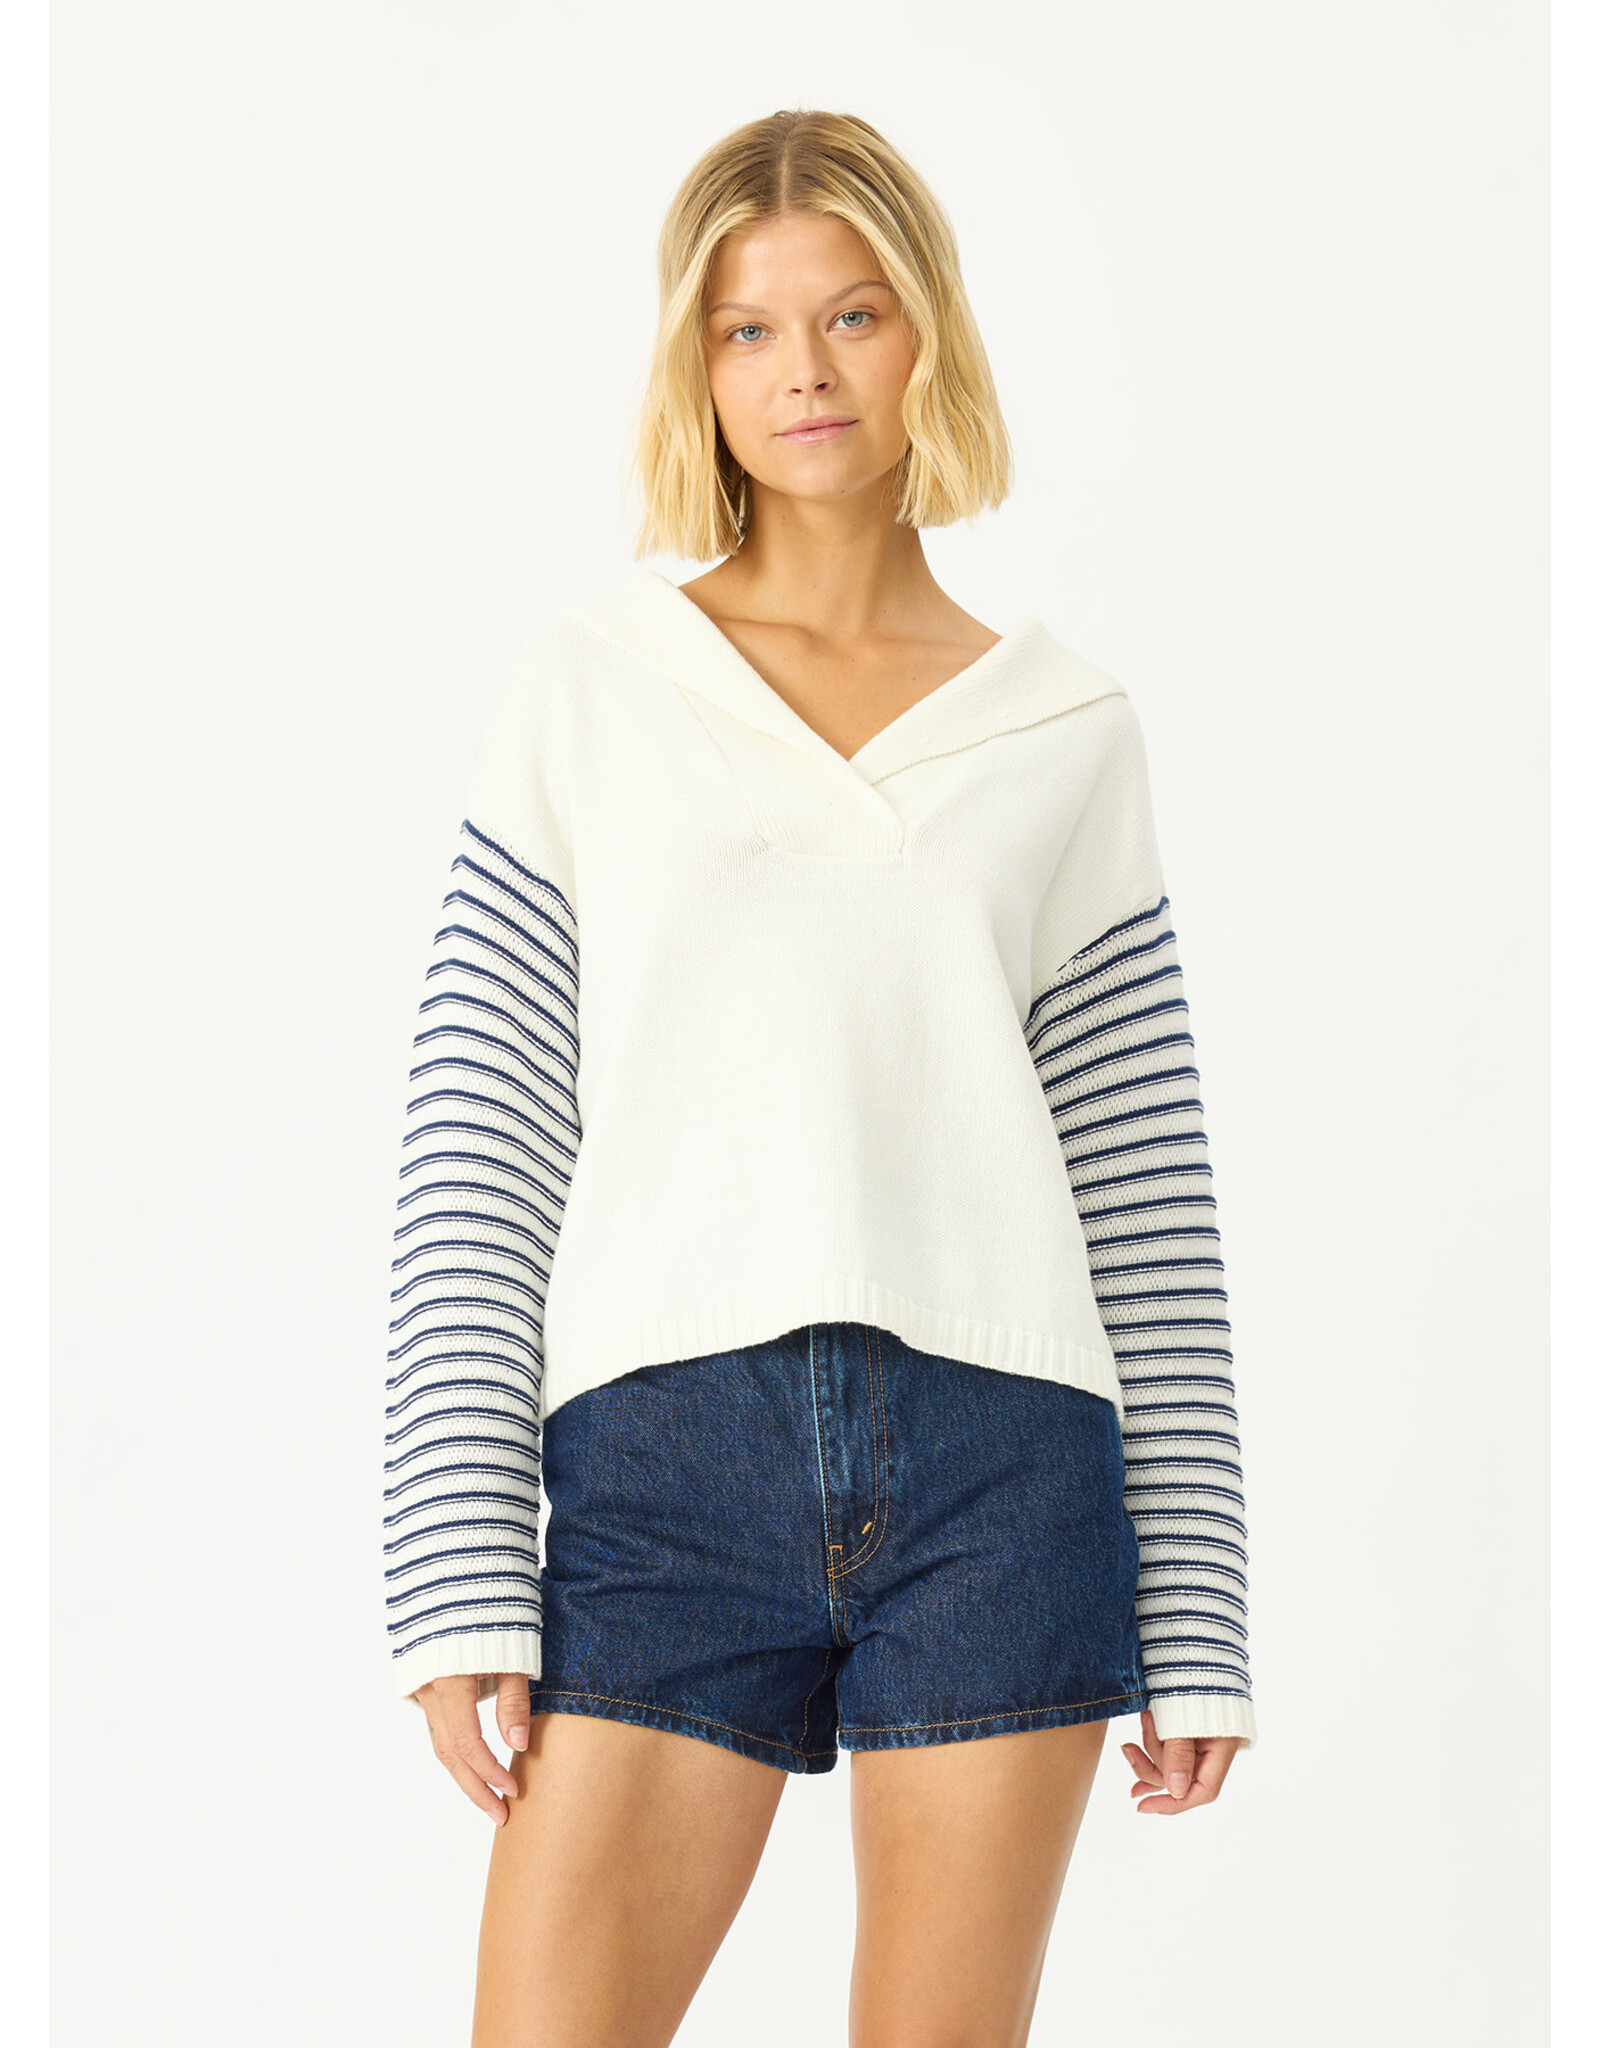 Stitches & Stripes SS Quincy Pullover